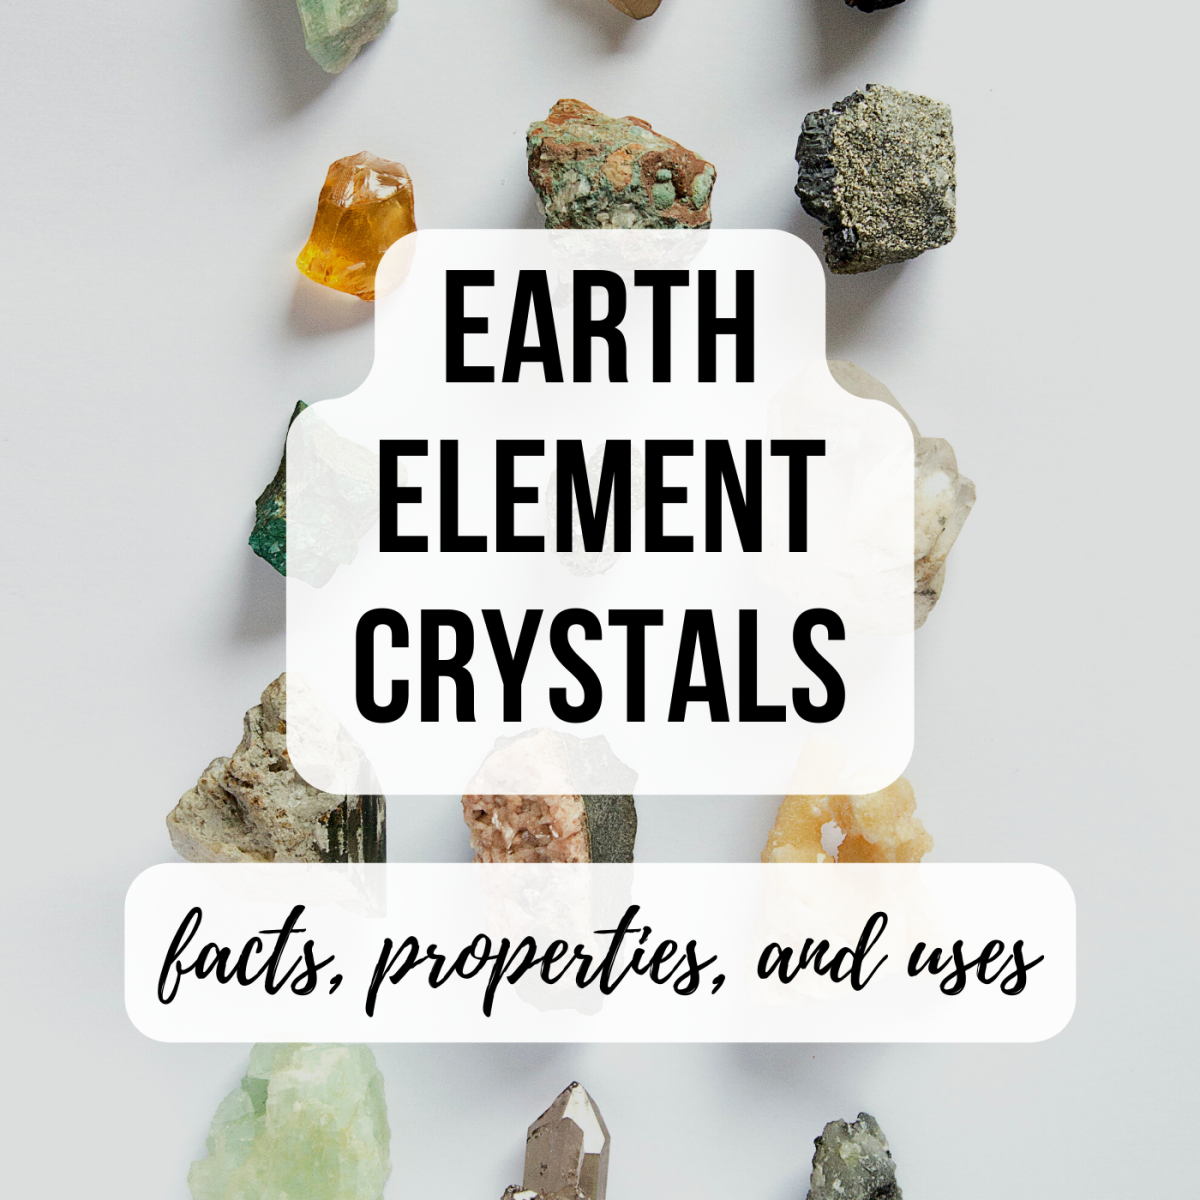 Earth element crystals and their properties.